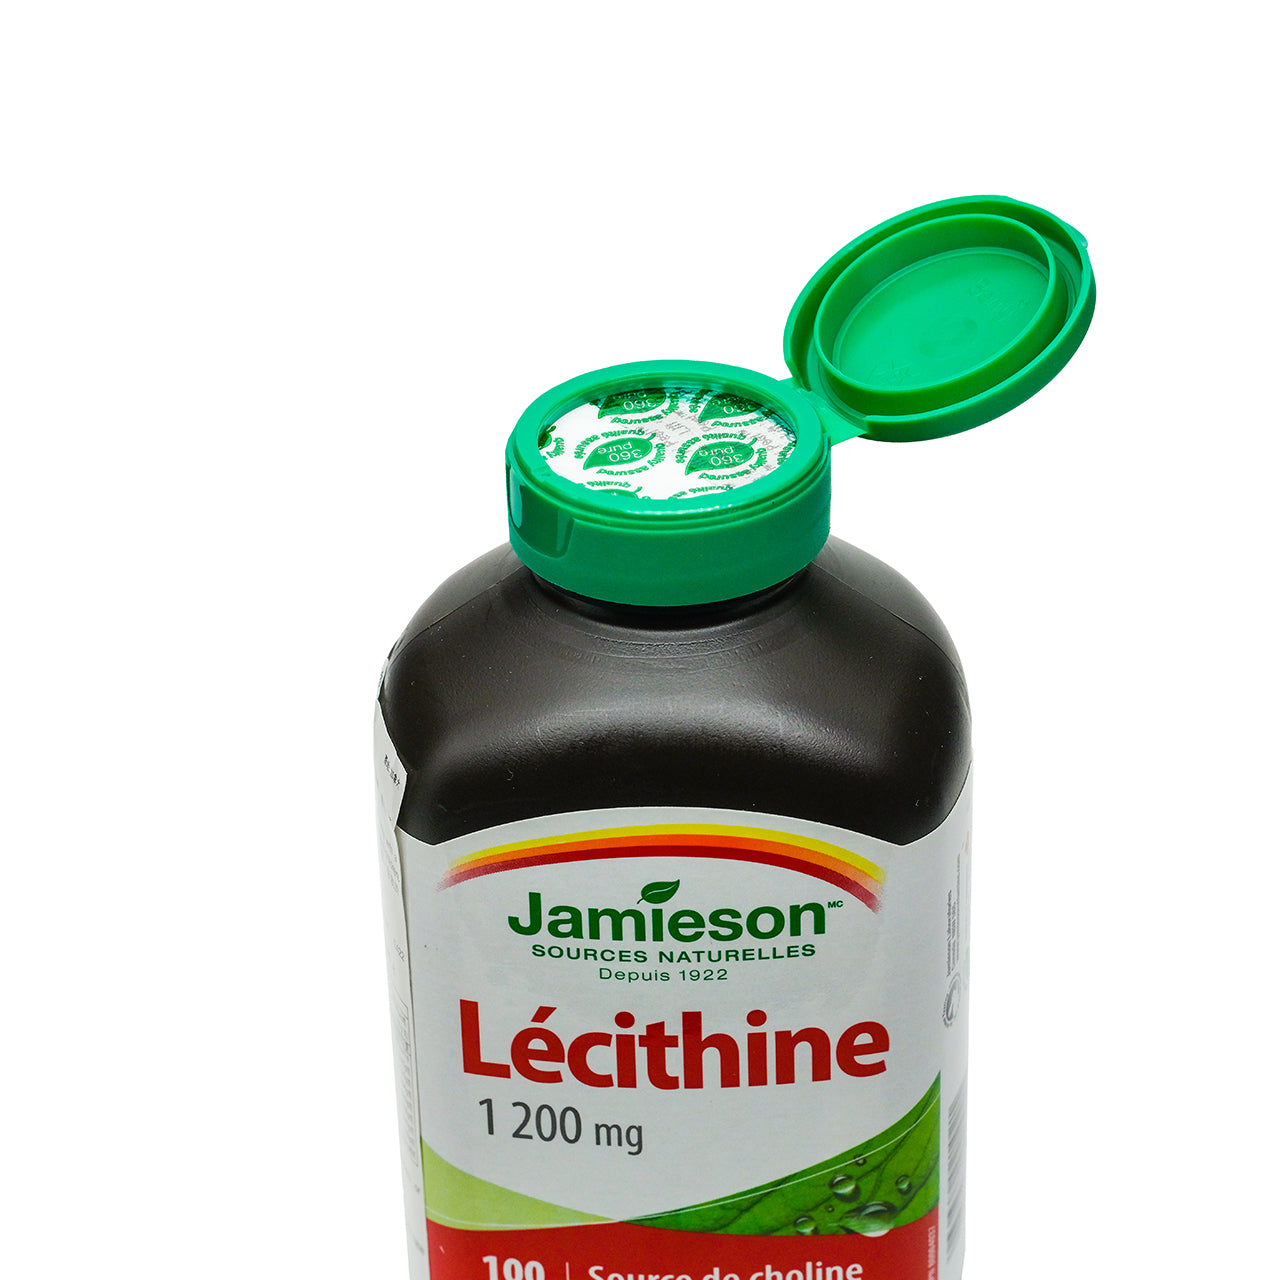 Parallel Import Jamieson Lecithin 1200mg 100 Softgels